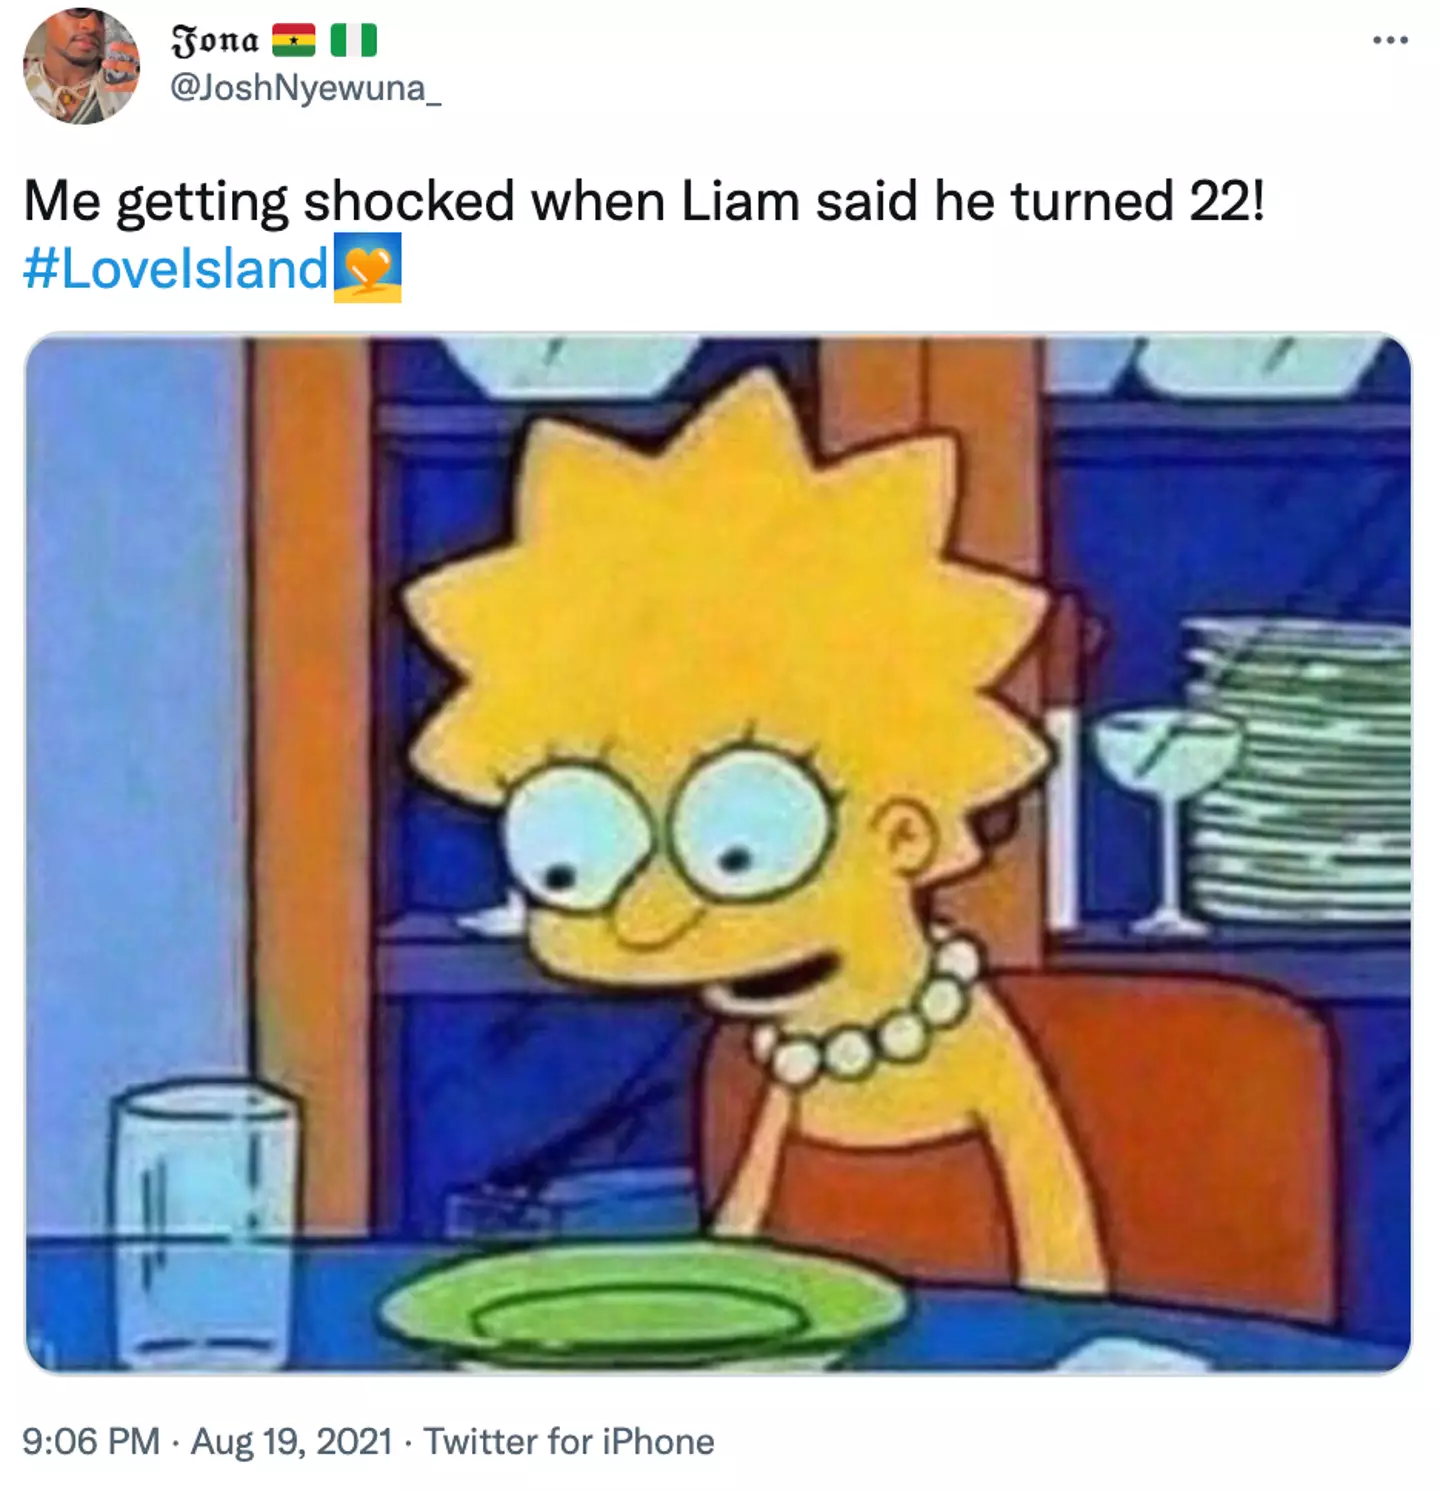 Love Island fans reacted to Liam's age on Twitter (